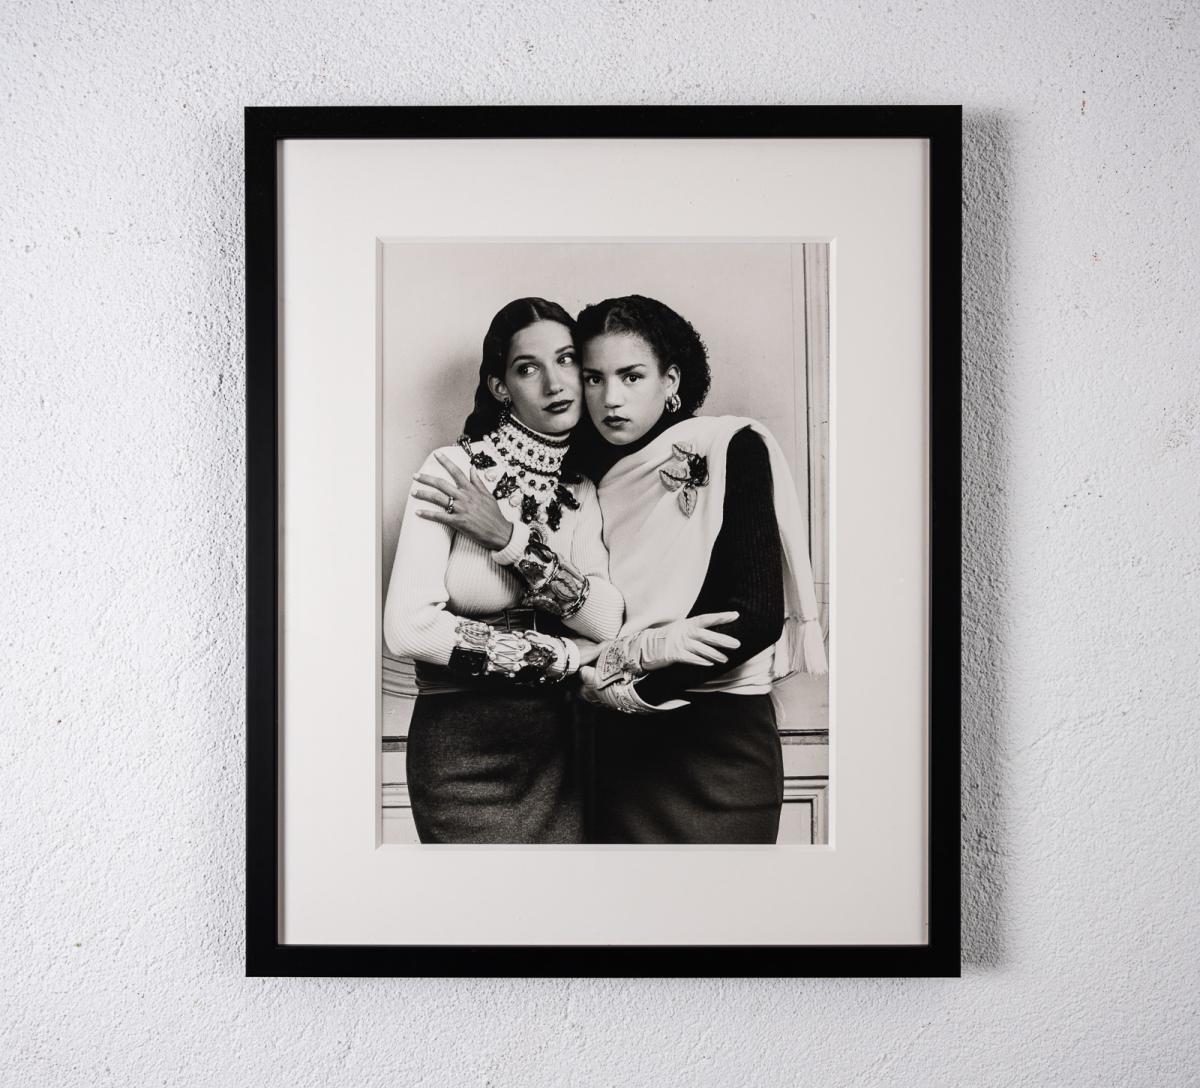 Original photograph of two models by Karl Lagerfeld